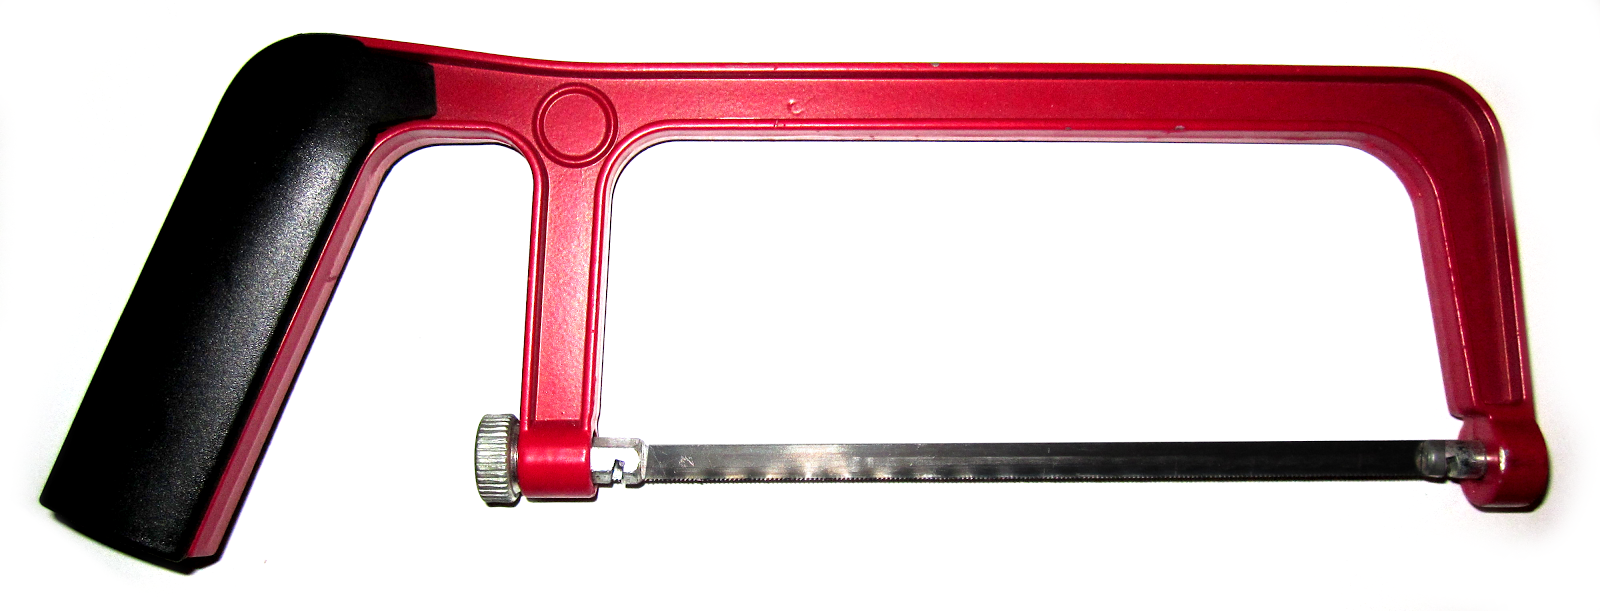 Red jig saw